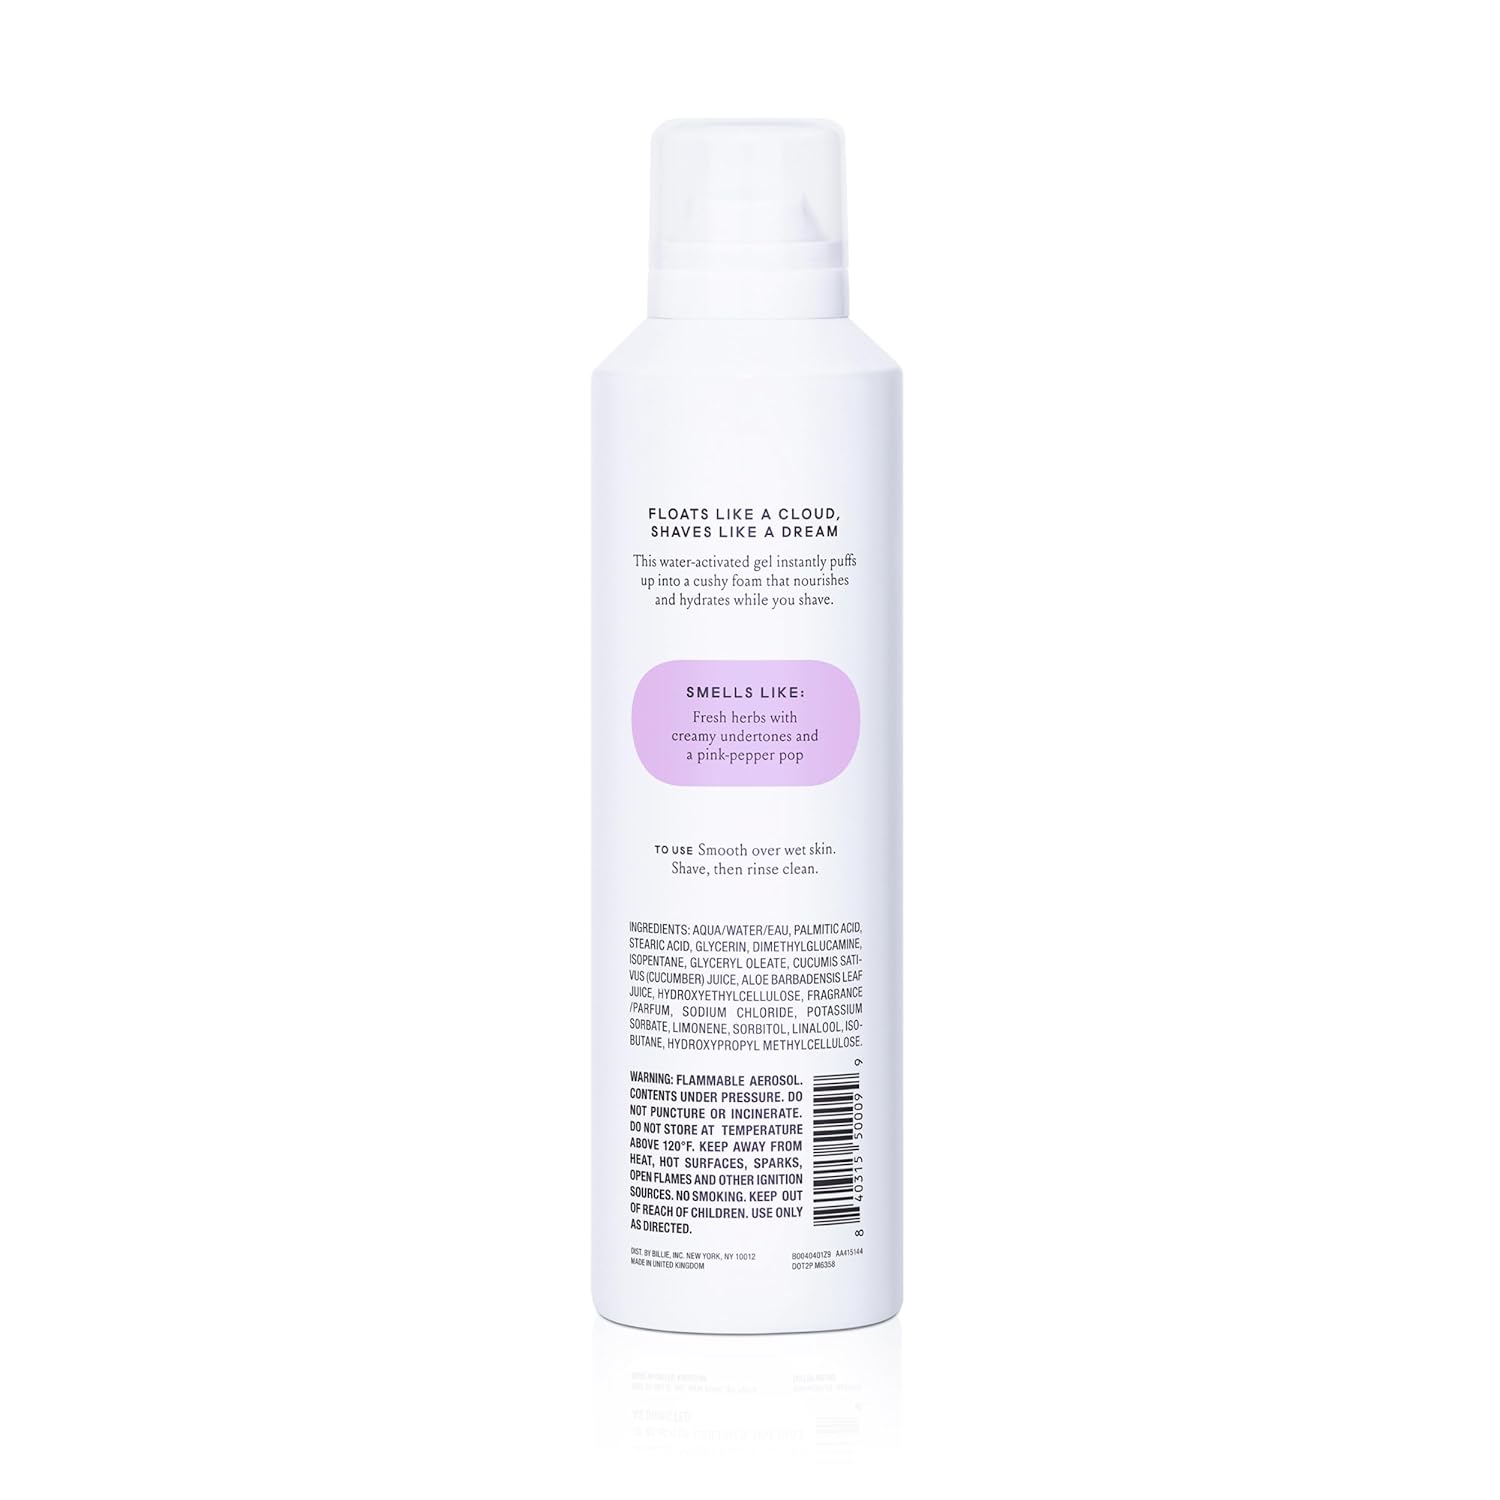 Billie SkyFoam Shave Gel - Lavender Milk Scent - Water-activated Foam - Made With Aloe & Cucumber - For A Close, Smooth Shave - 6.7 fl oz : Beauty & Personal Care